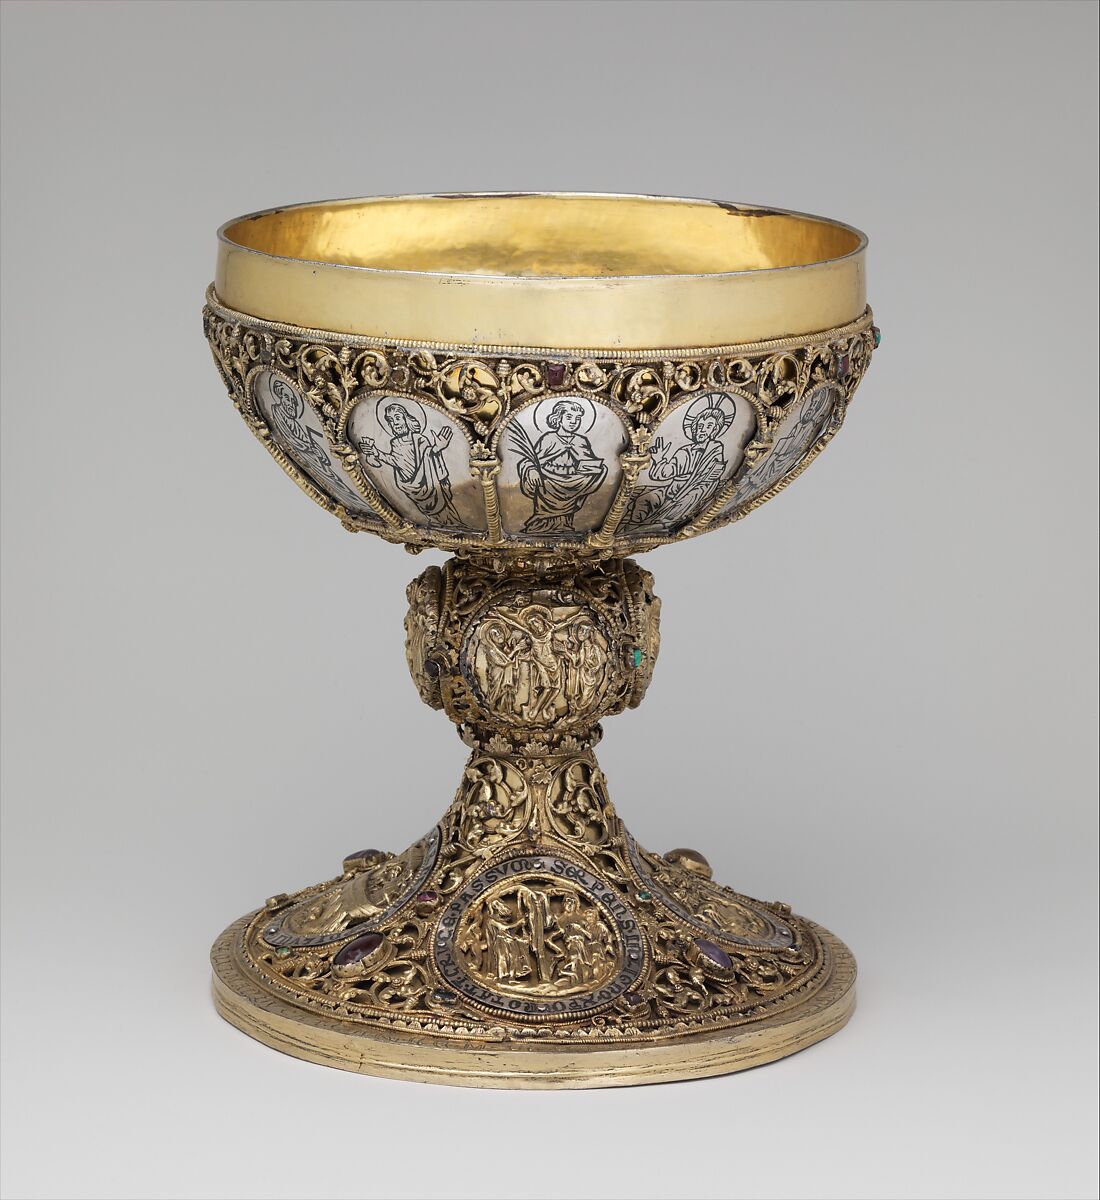 Chalice, Silver, gilded silver, niello, and jewels, German 